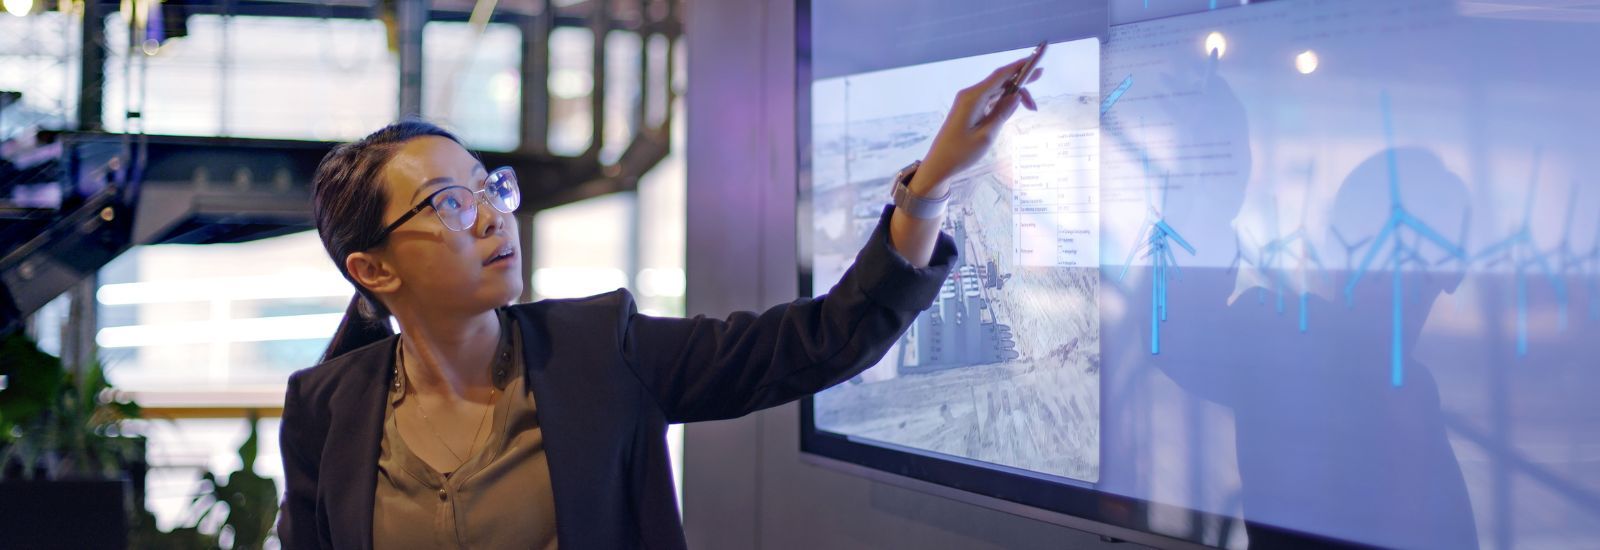 Woman pointing to data on a large screen